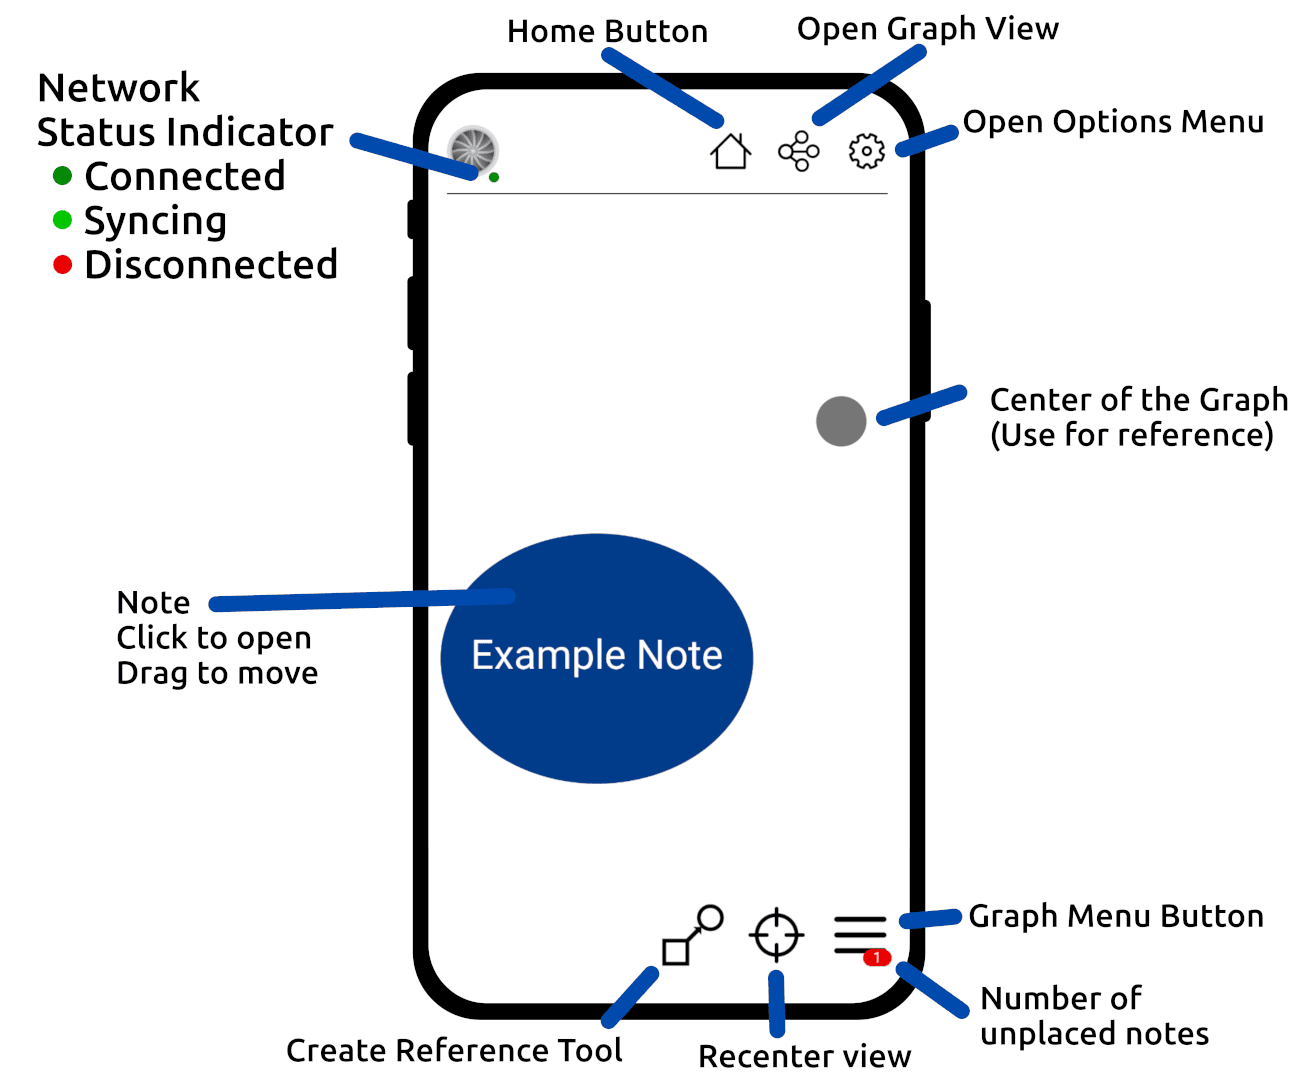 A detailed diagram with callouts pointing to parts of the interface.